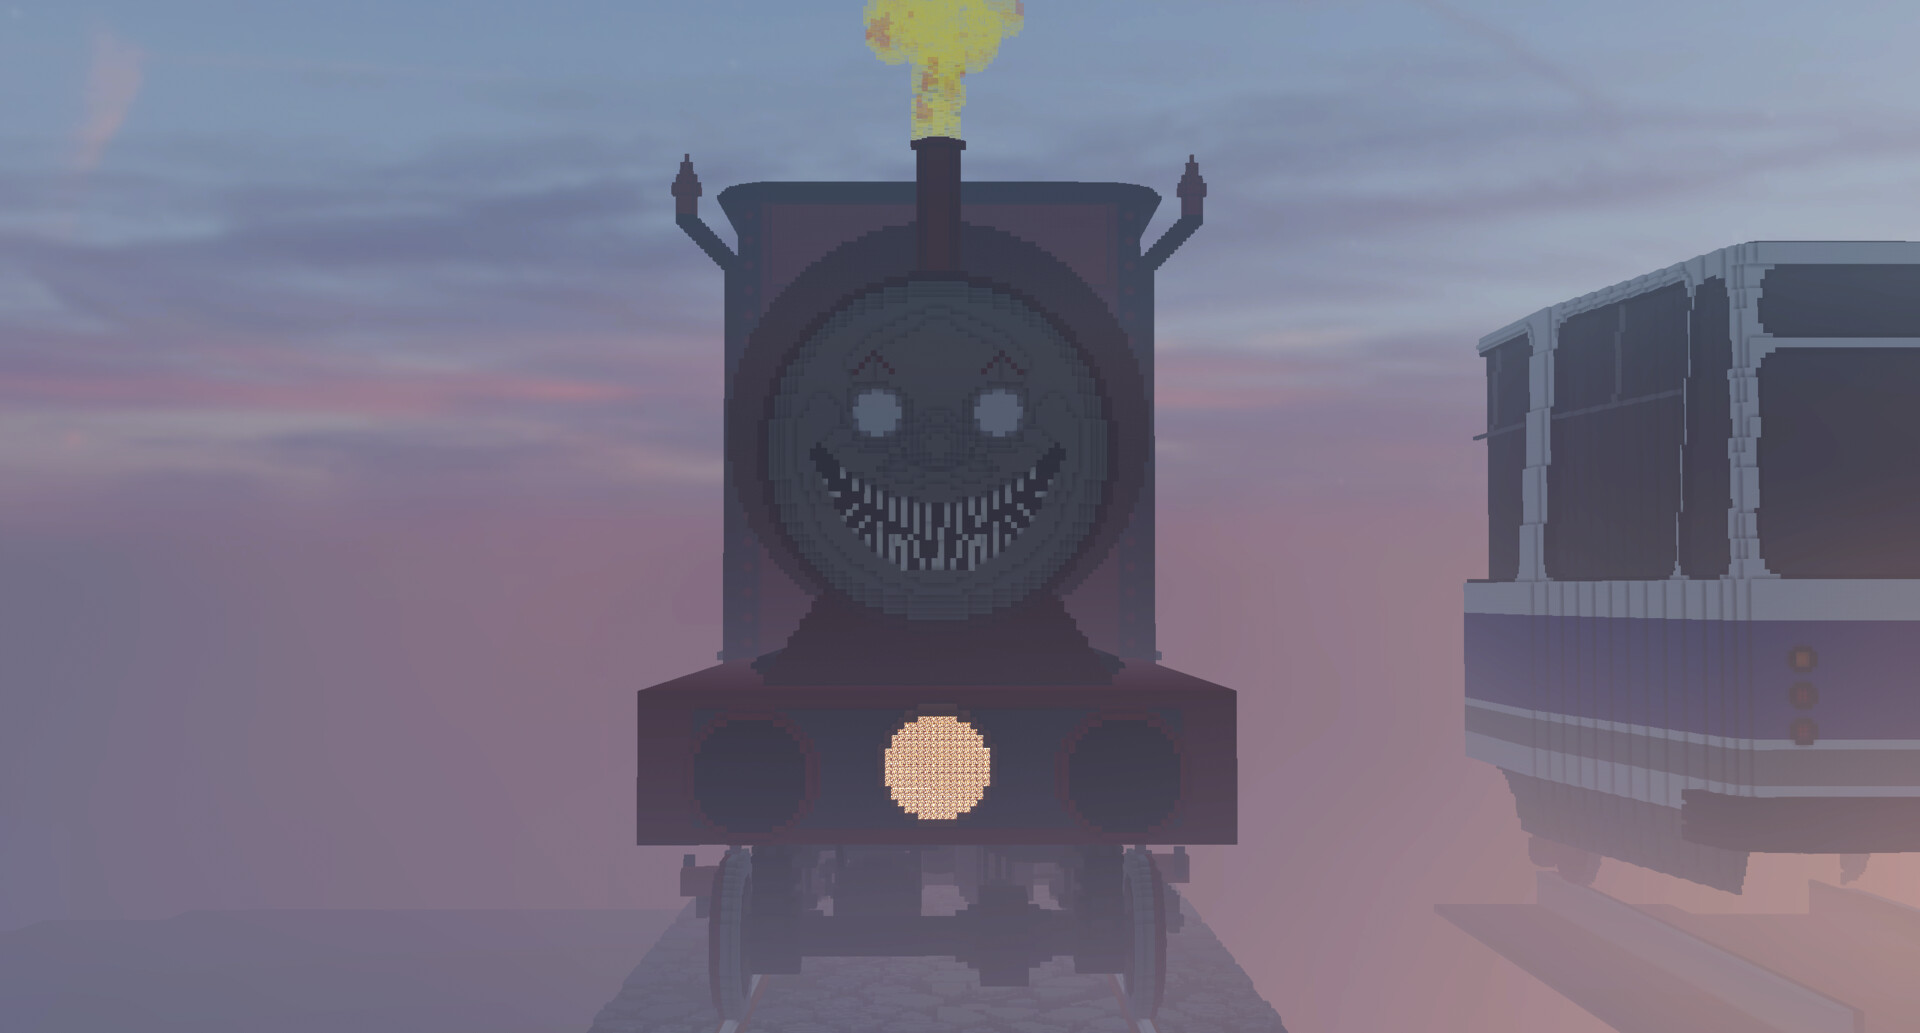 Choo-Choo Charles will arrive at platform Steam in two months